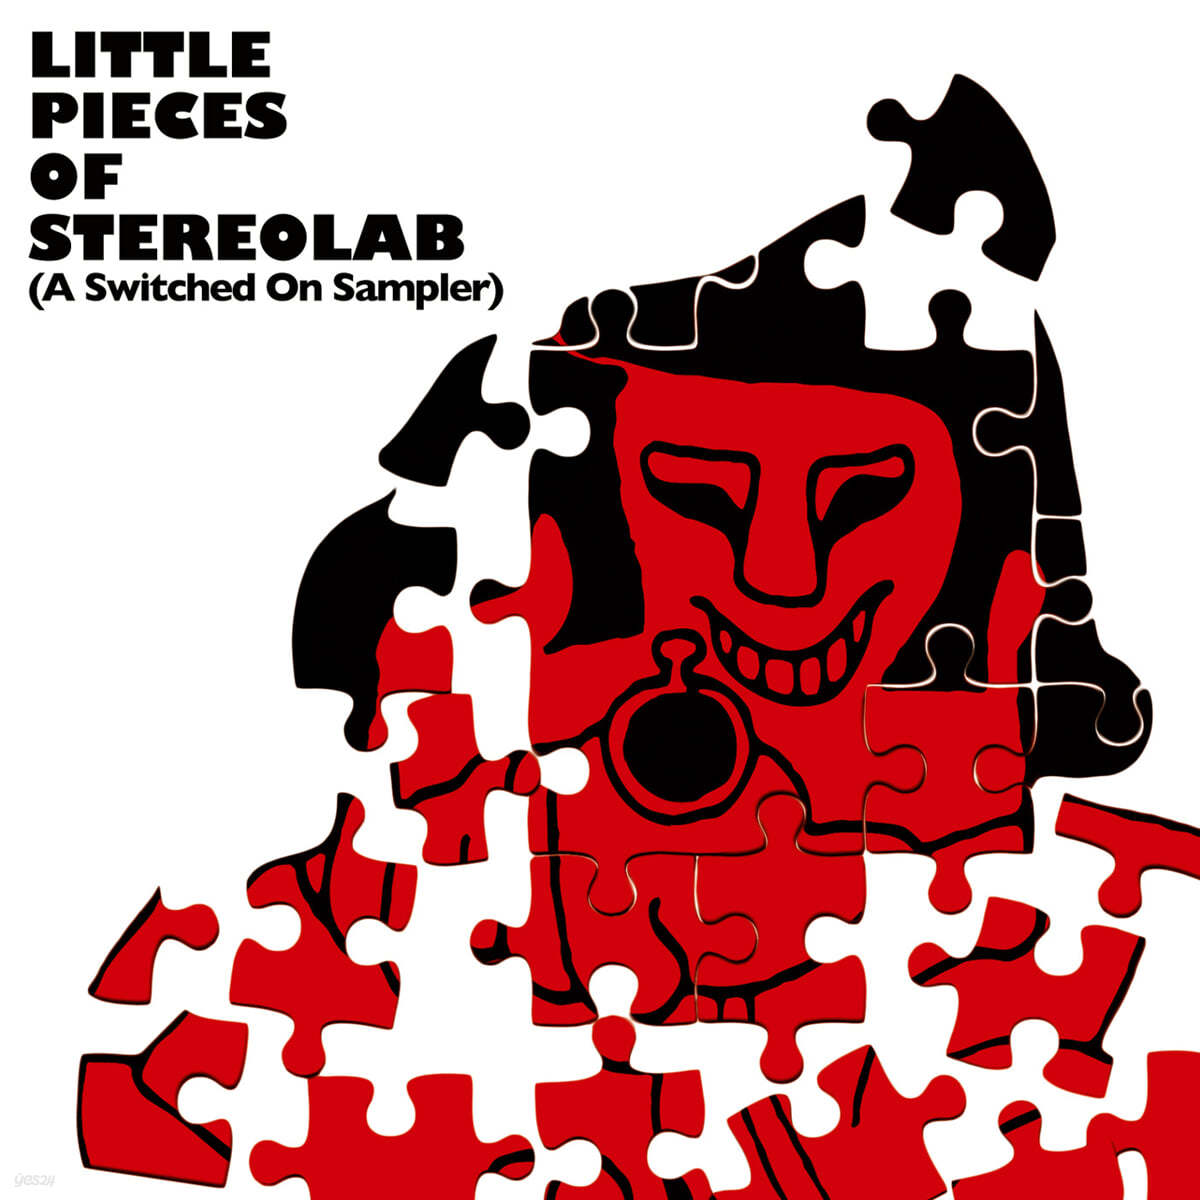 Stereolab (스테레오랩) - Little Pieces Of Stereolab [A Switched On Sampler]